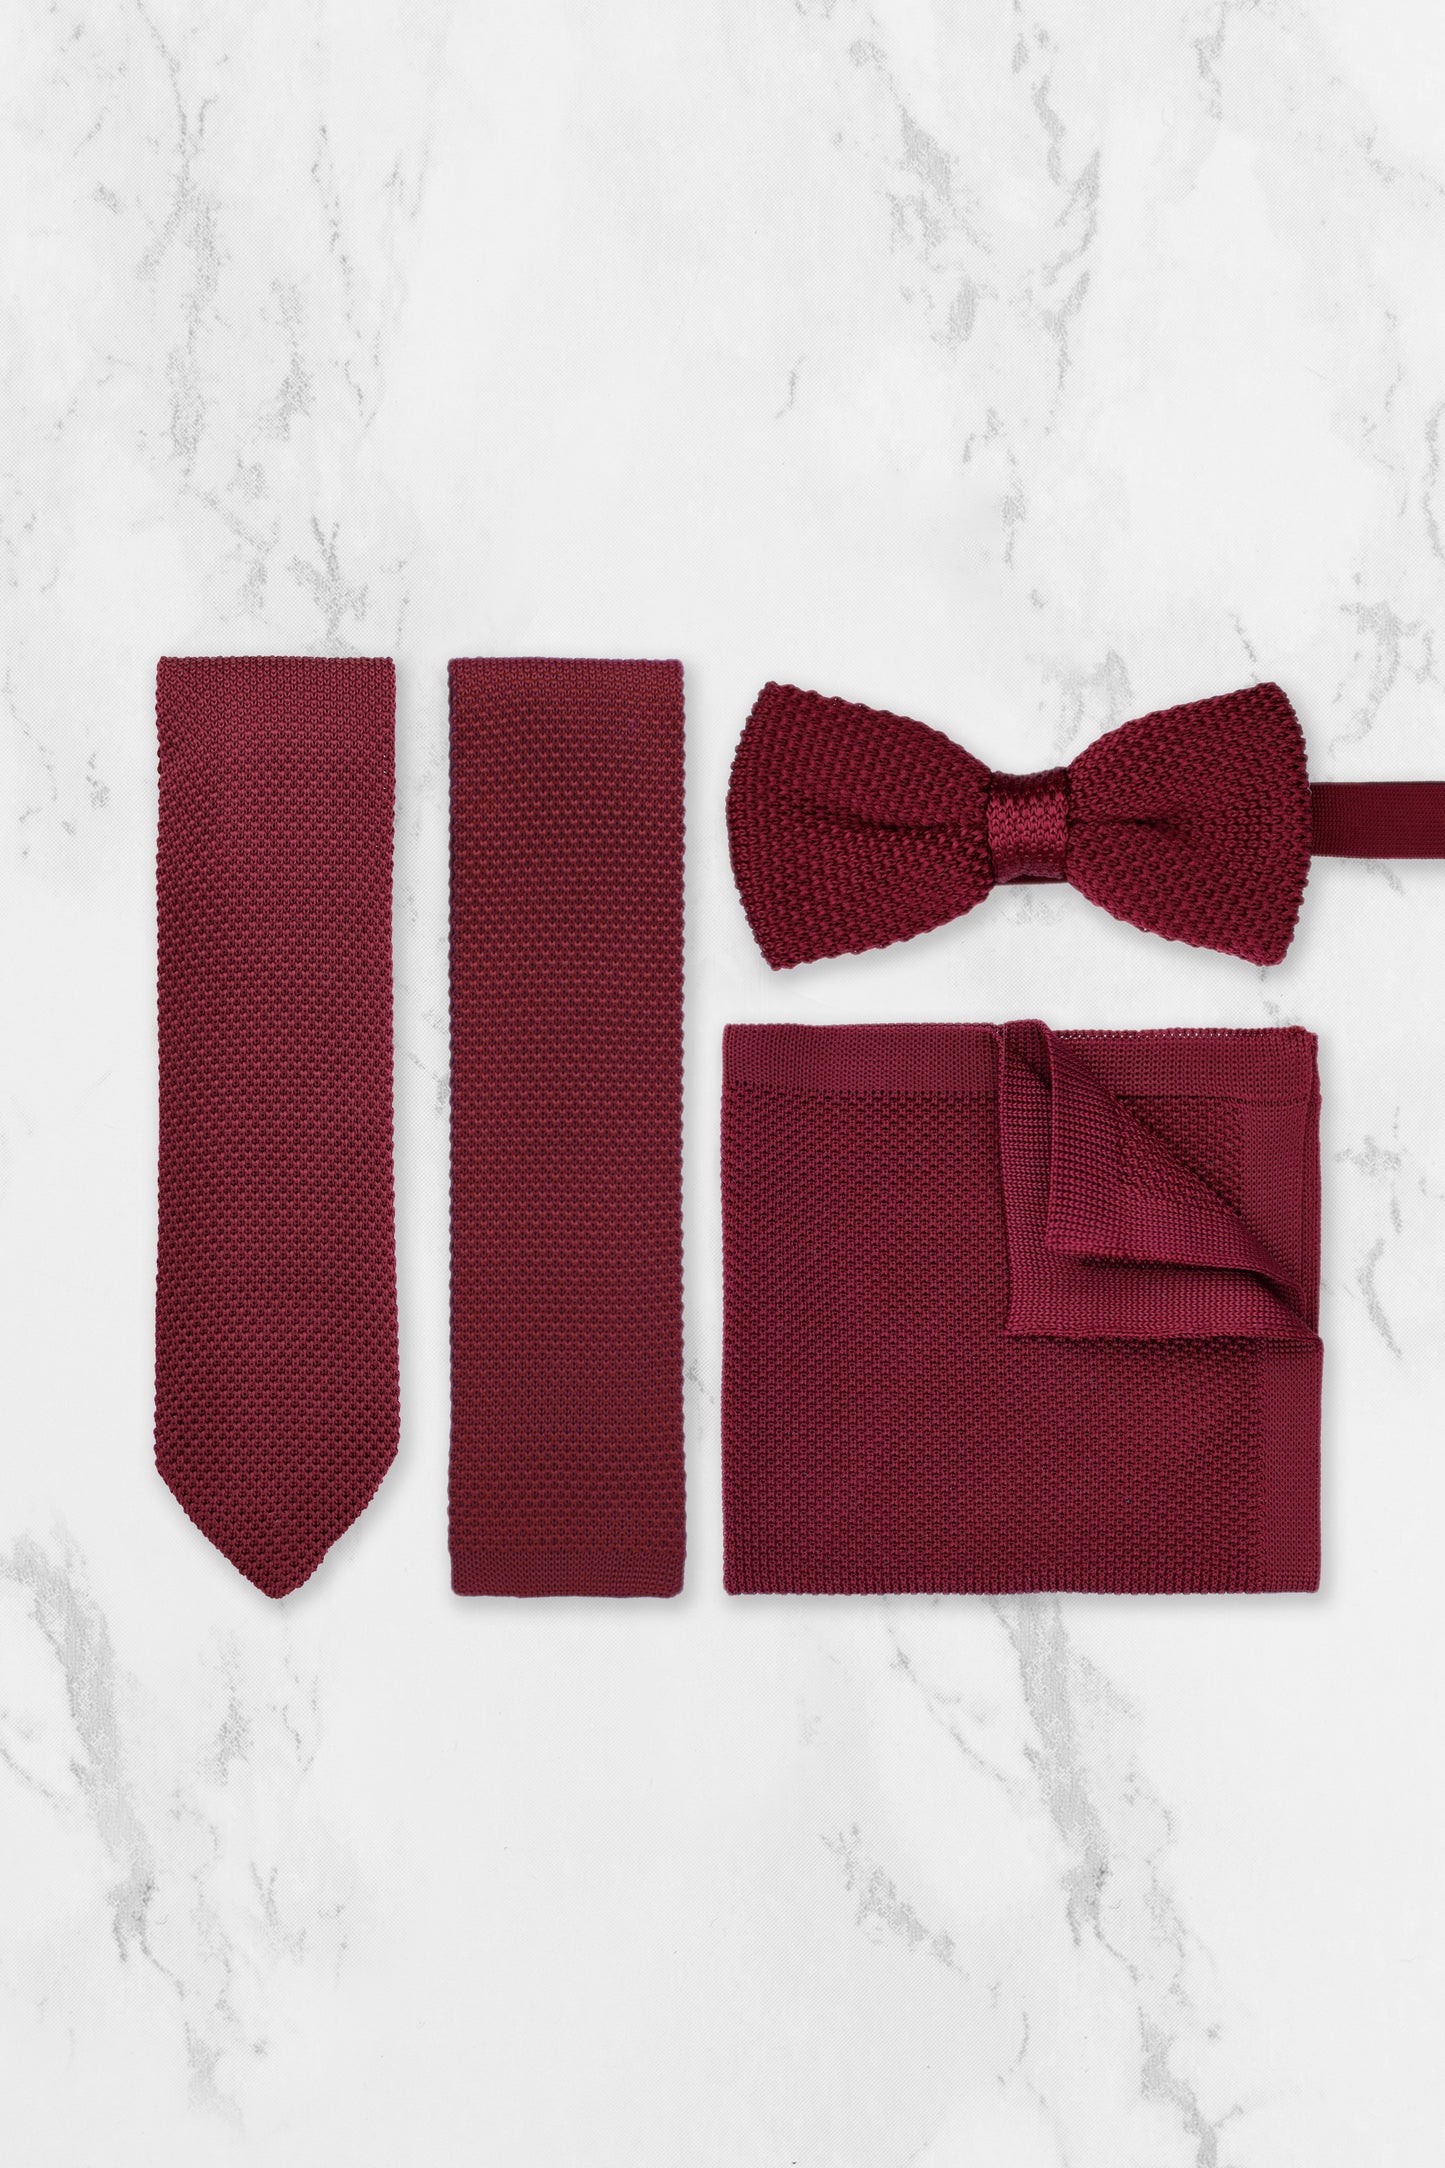 100% Polyester Knitted Pocket Square - Burgundy Red